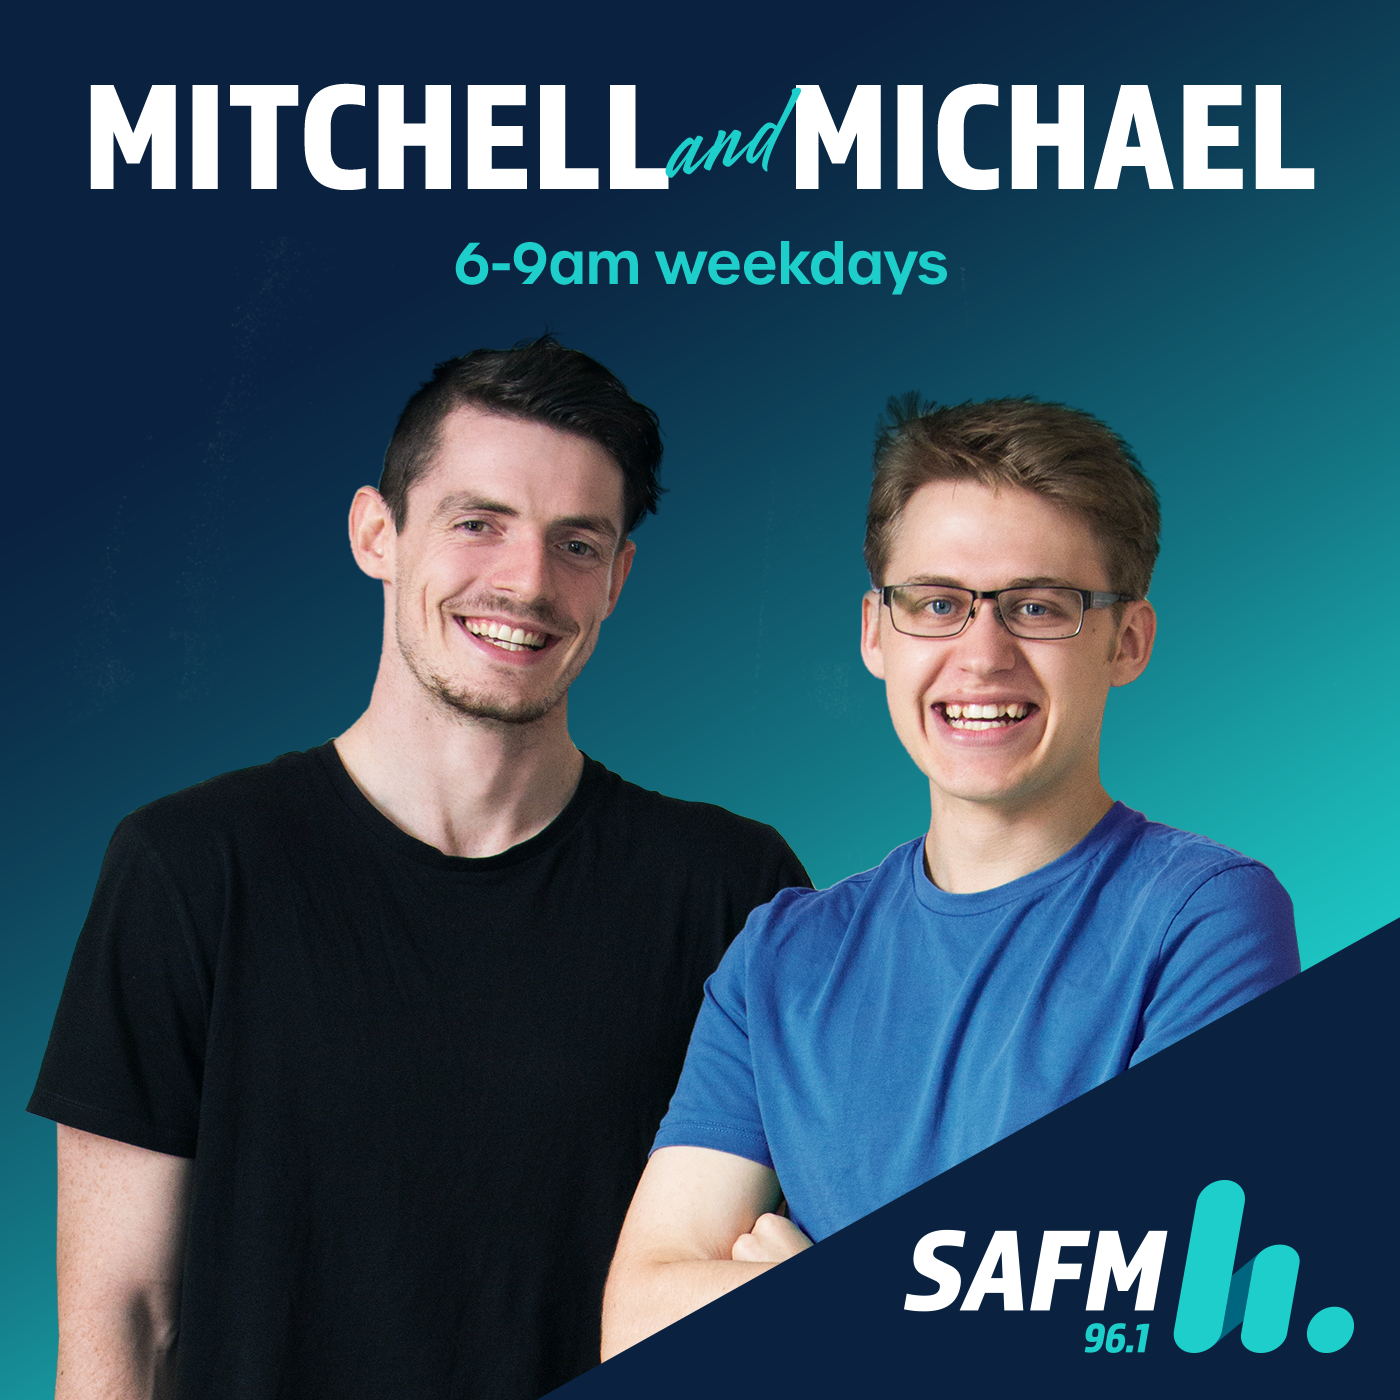 21st August - Mitchell & Michael's Final Show In The Limestone Coast